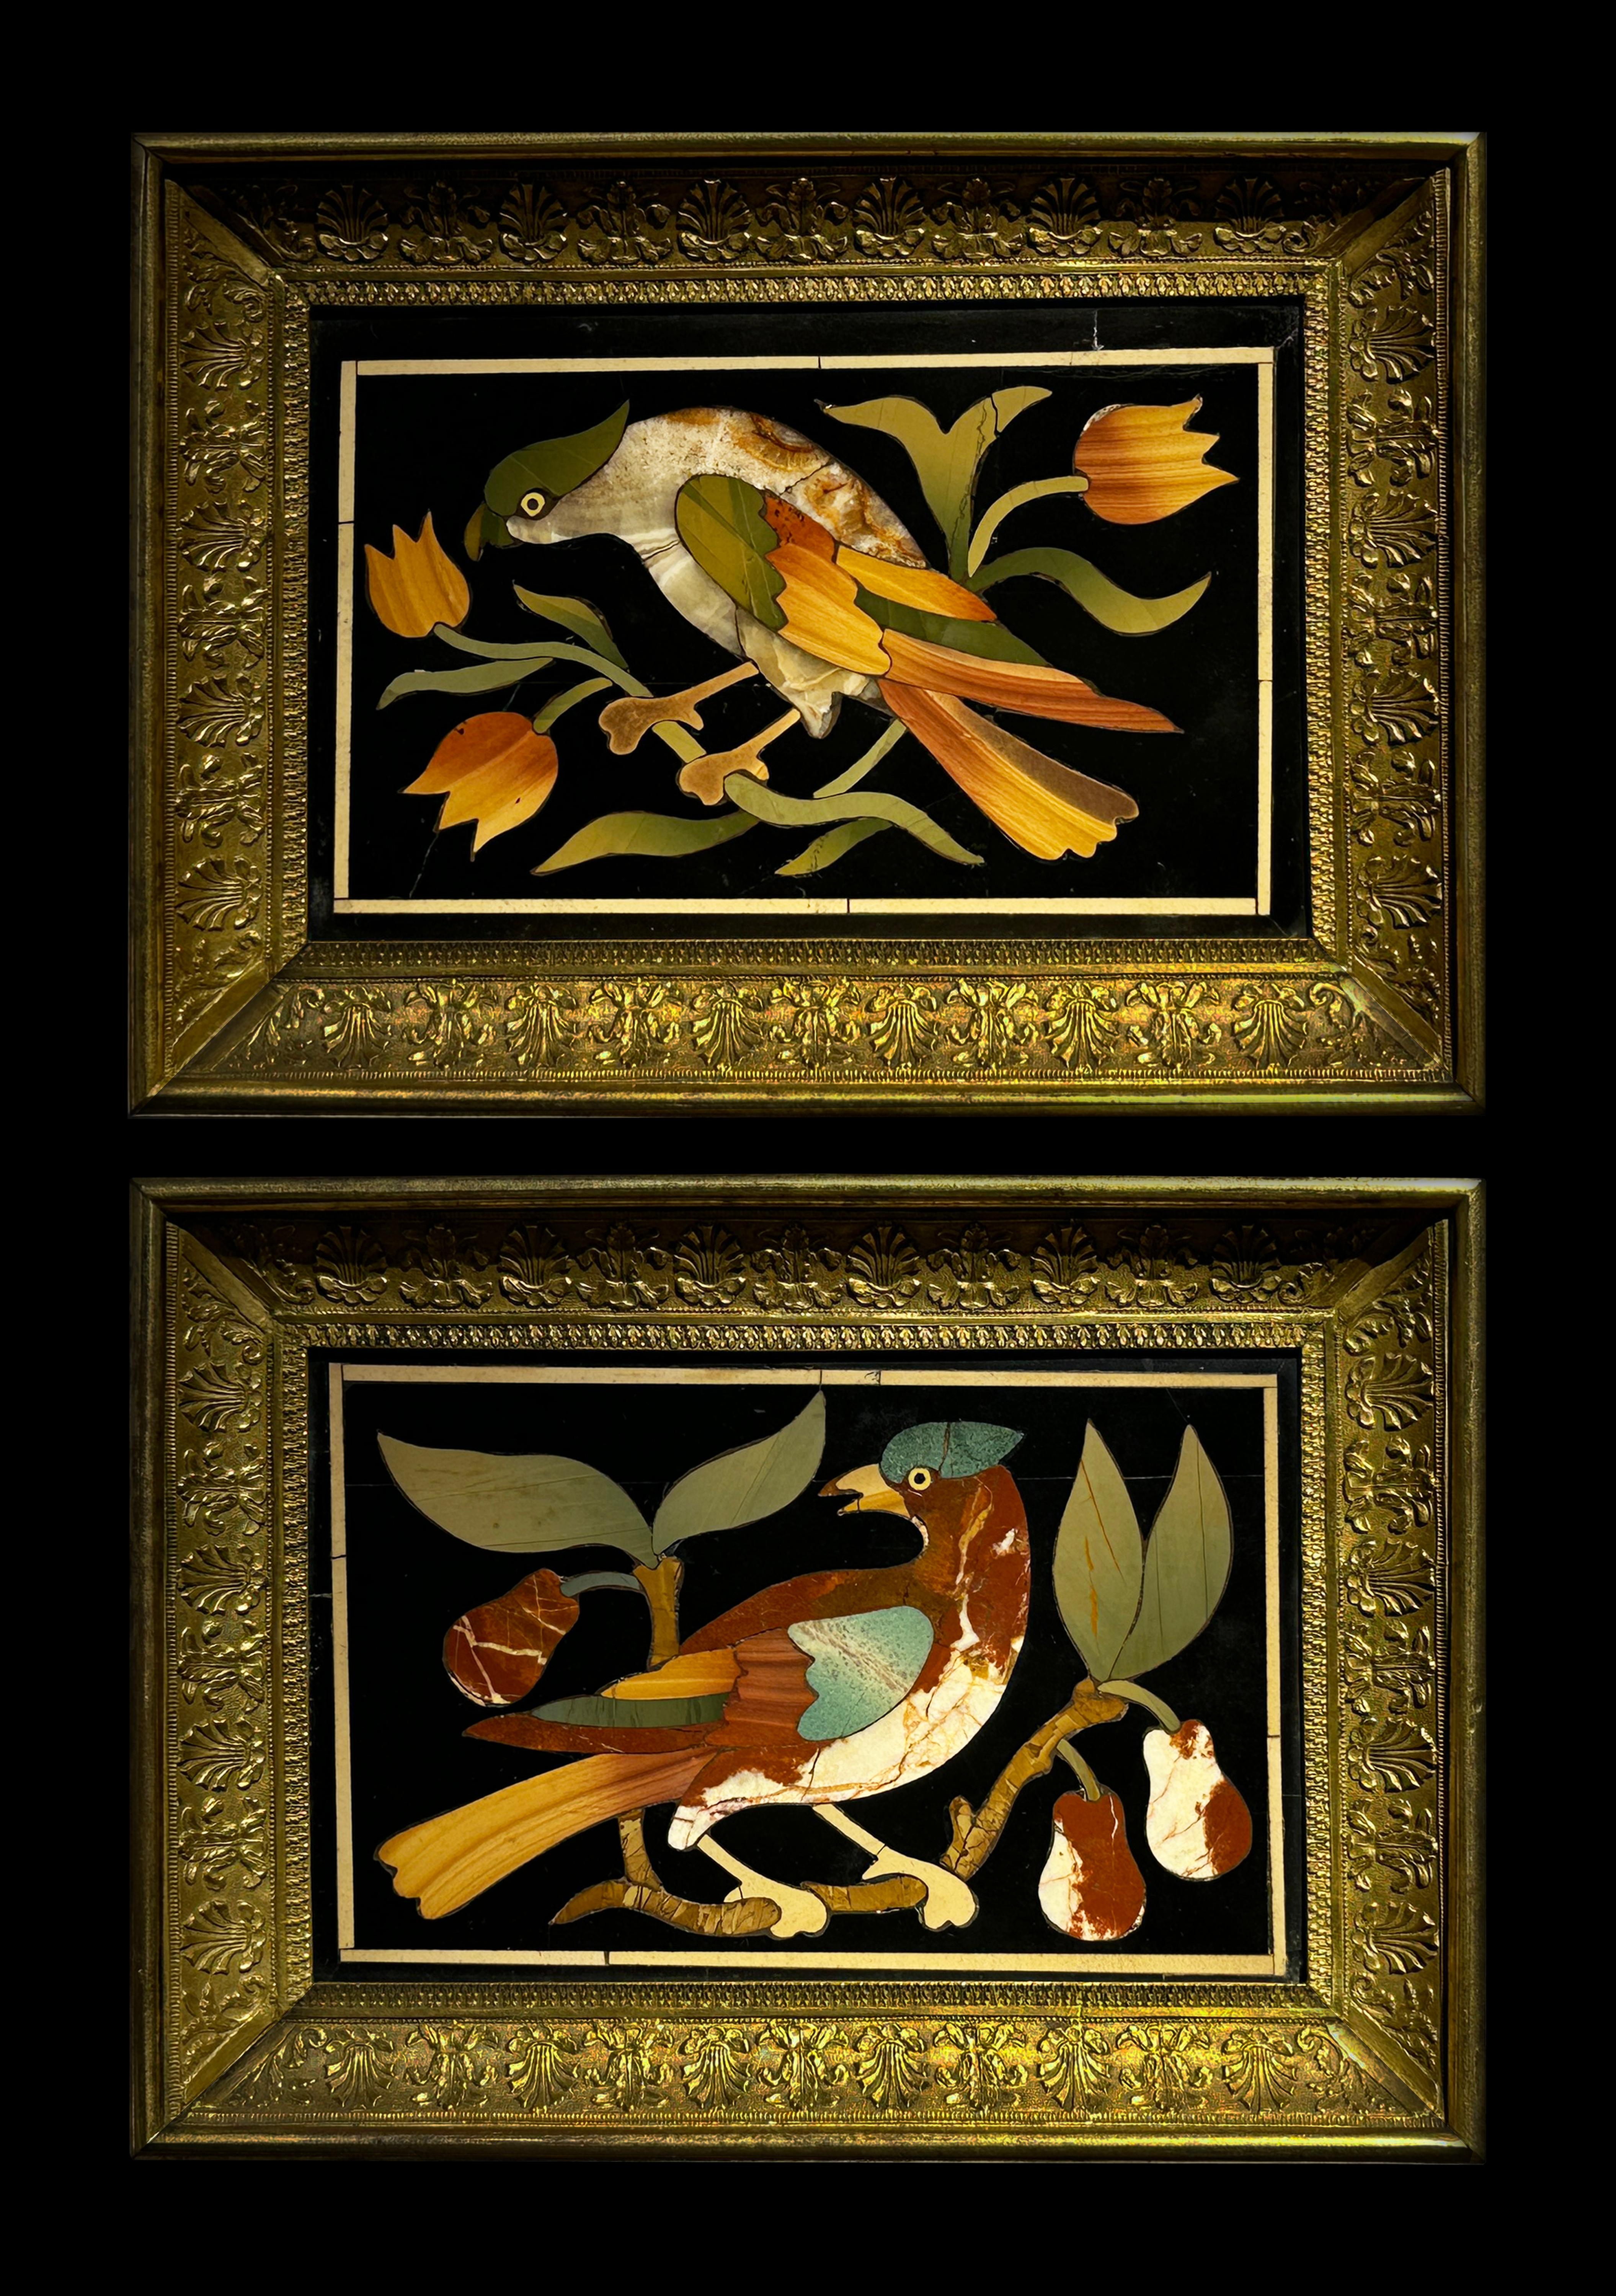 PAIR OF PIETRA DURA PLAQUES WITH BIRDS IN GILT BRONZE FRAME, 18th Century - Art by Unknown